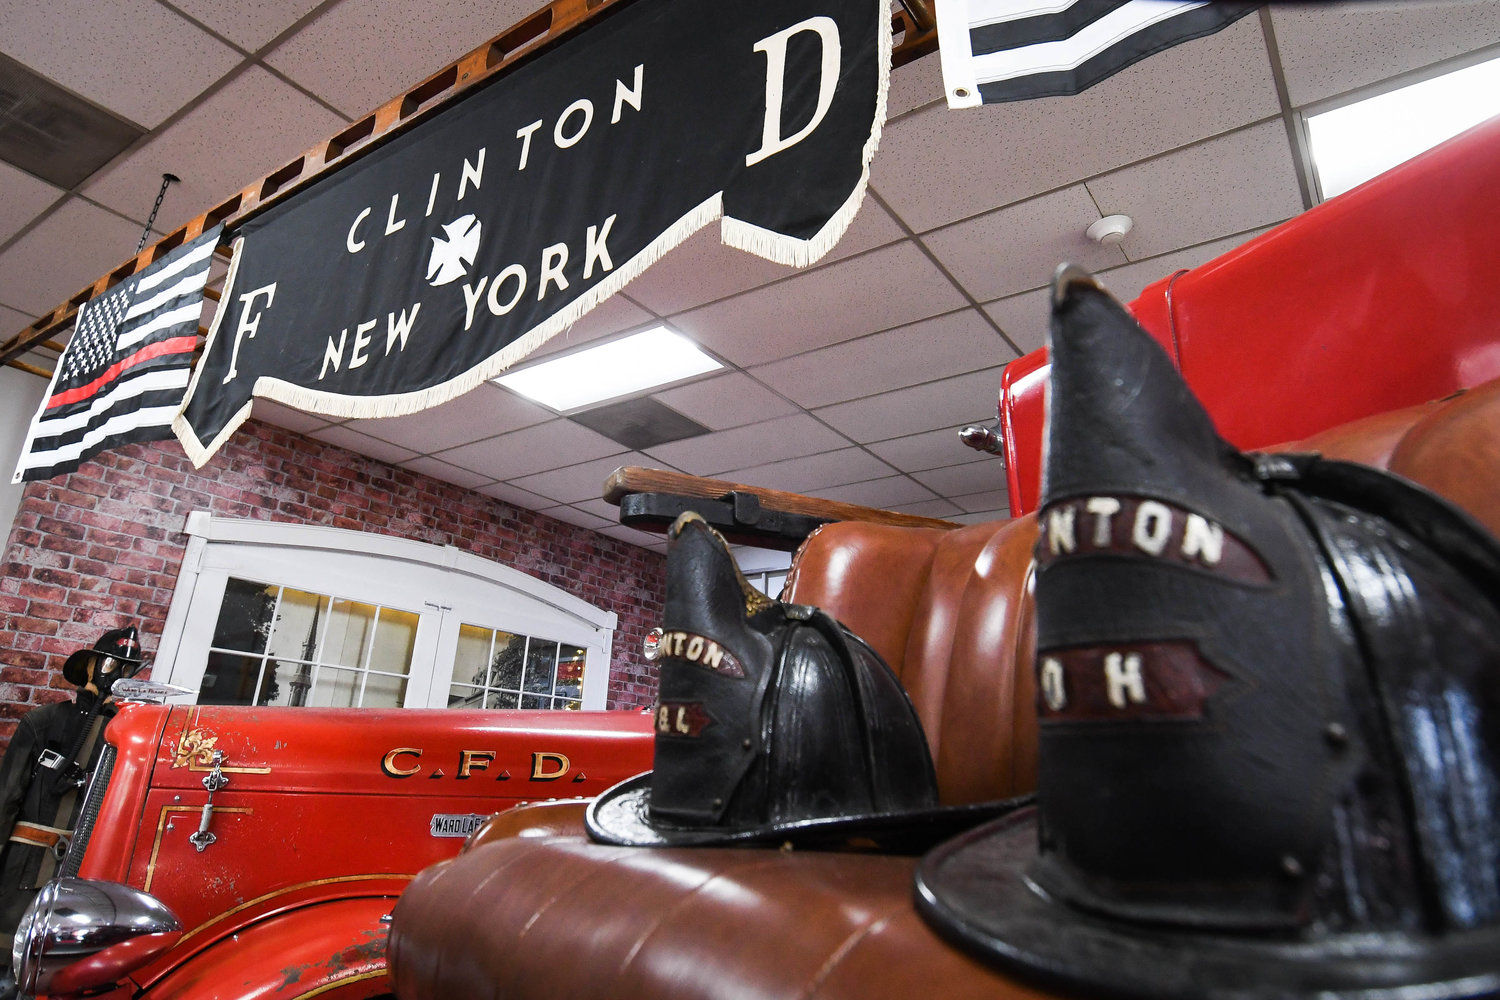 The Clinton Fire Department Museum showcases the rich history of the department with old and new equipment, historical photos, fire trucks and more. The Clinton Fire Department was founded in 1866.